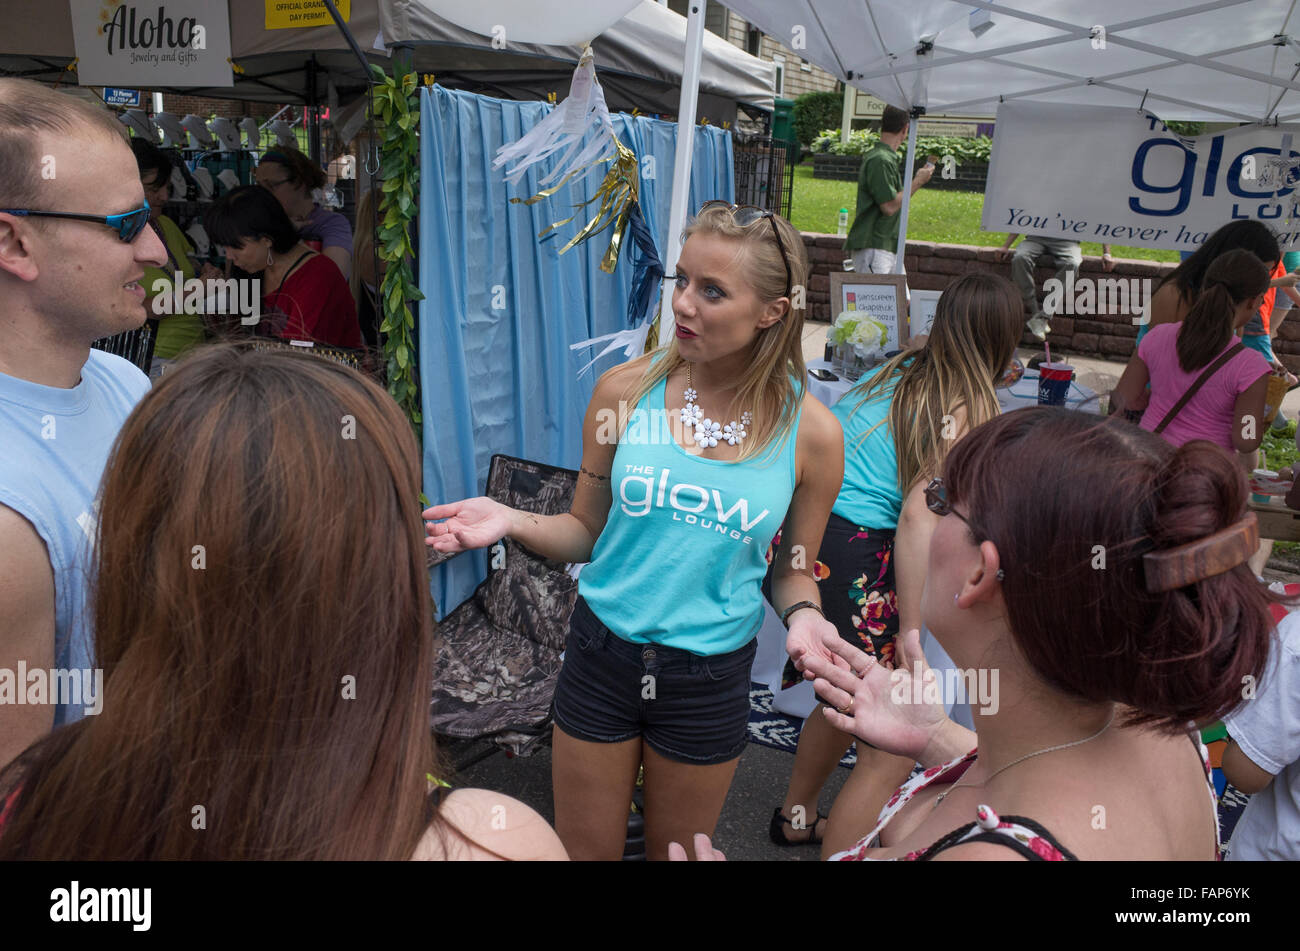 Woman describing the benefits of The Glow Lounge sunless tanning studio. Grand Old Day Street Fair. St Paul Minnesota MN USA Stock Photo